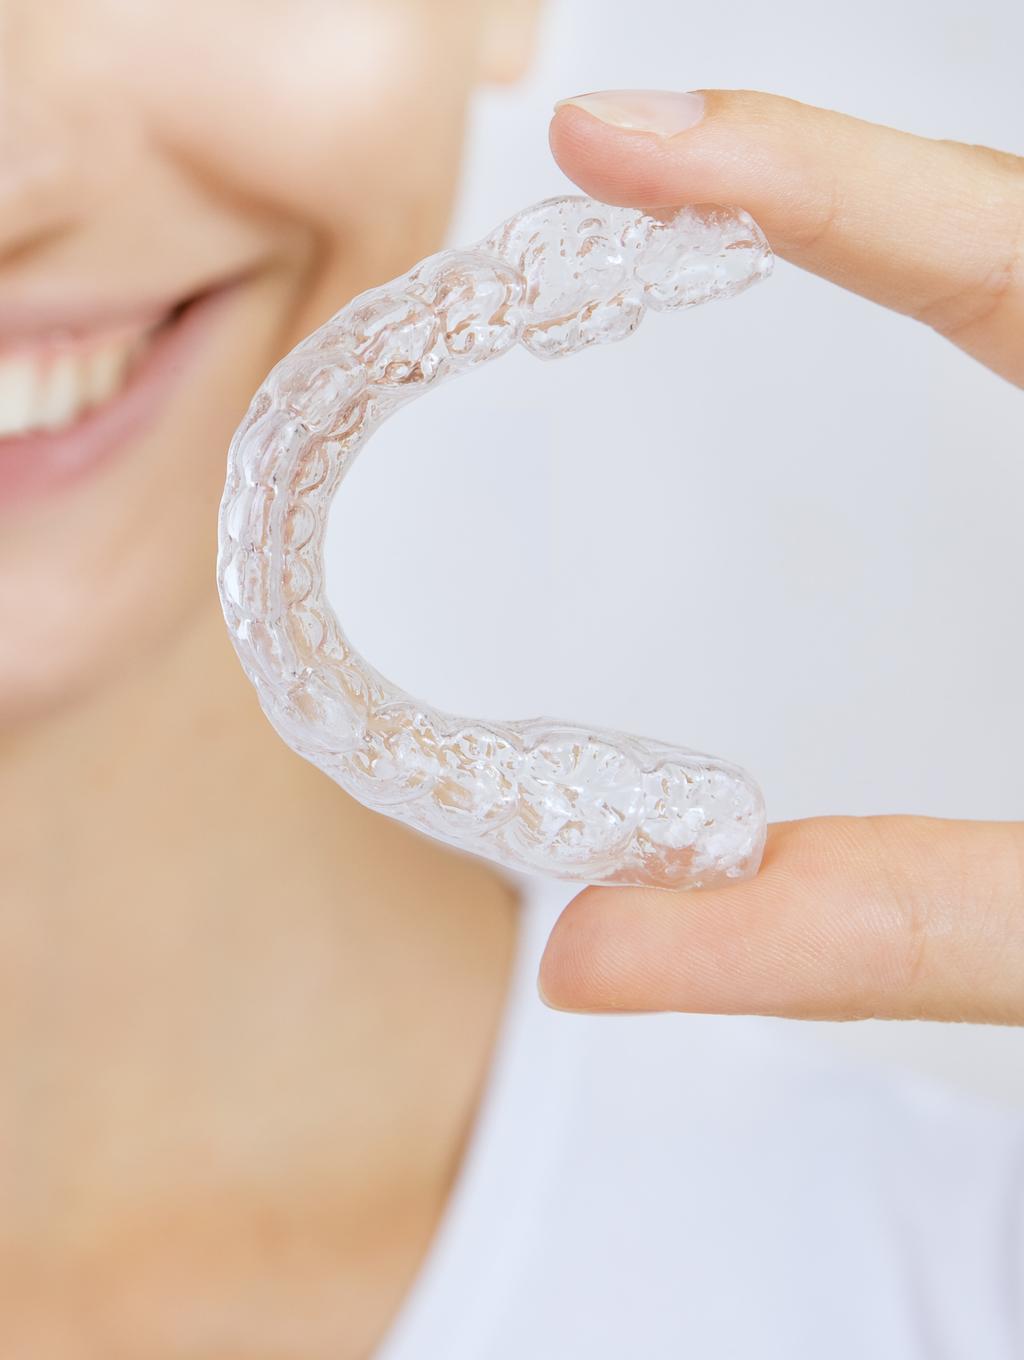 L I F E W I T H I N V I S A L I G N With Invisalign treatment, it s easy to make your smile pictureperfect for that special occasion.